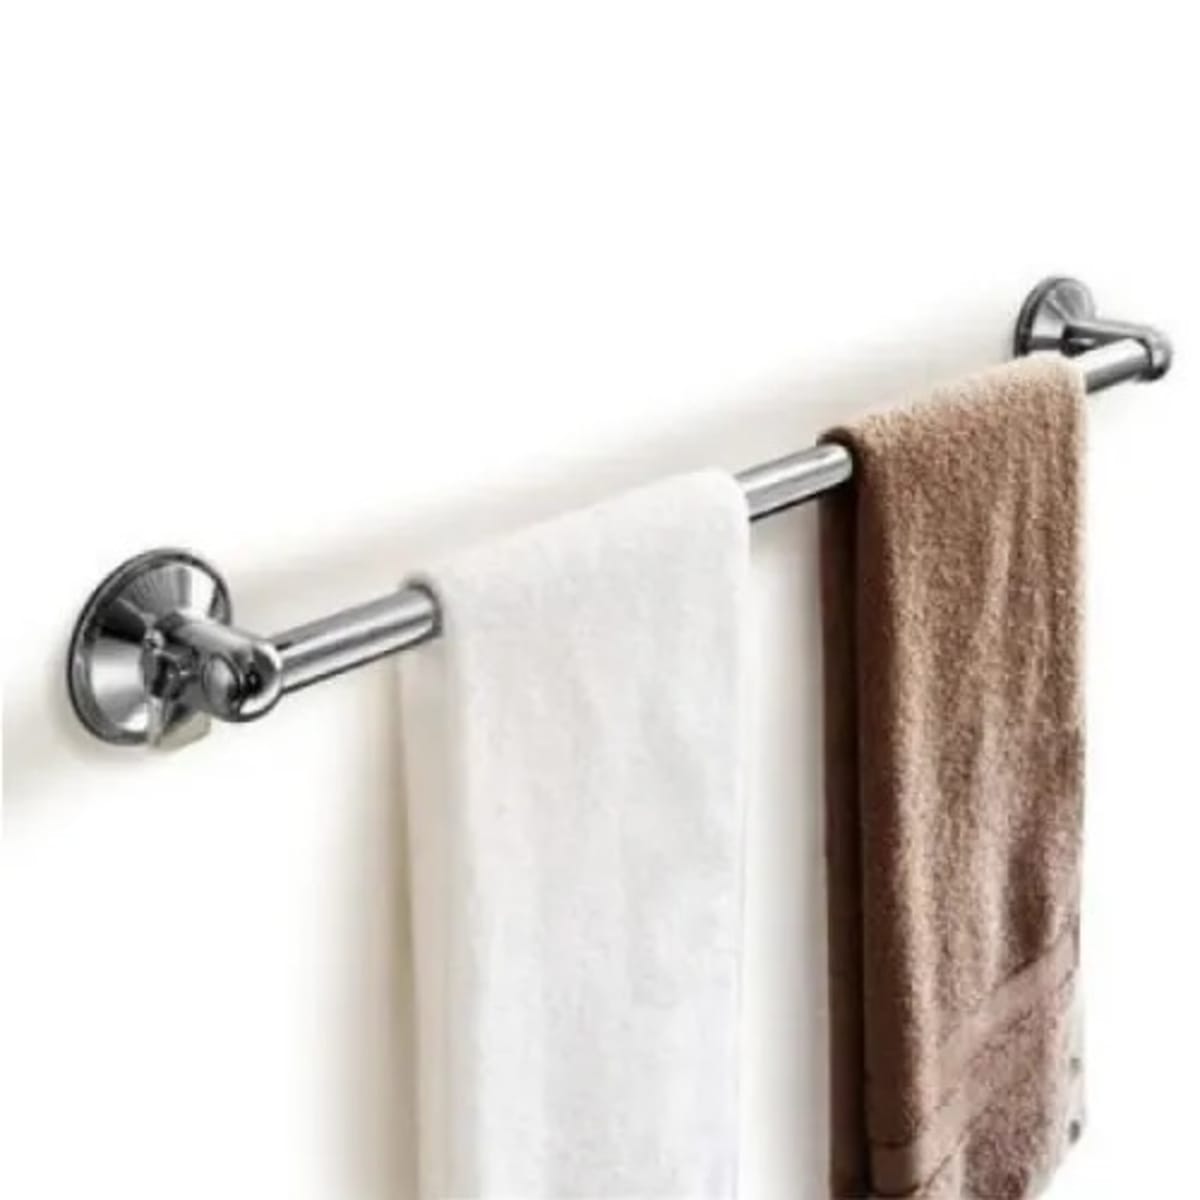 Stainless Towel Hanger-24inches